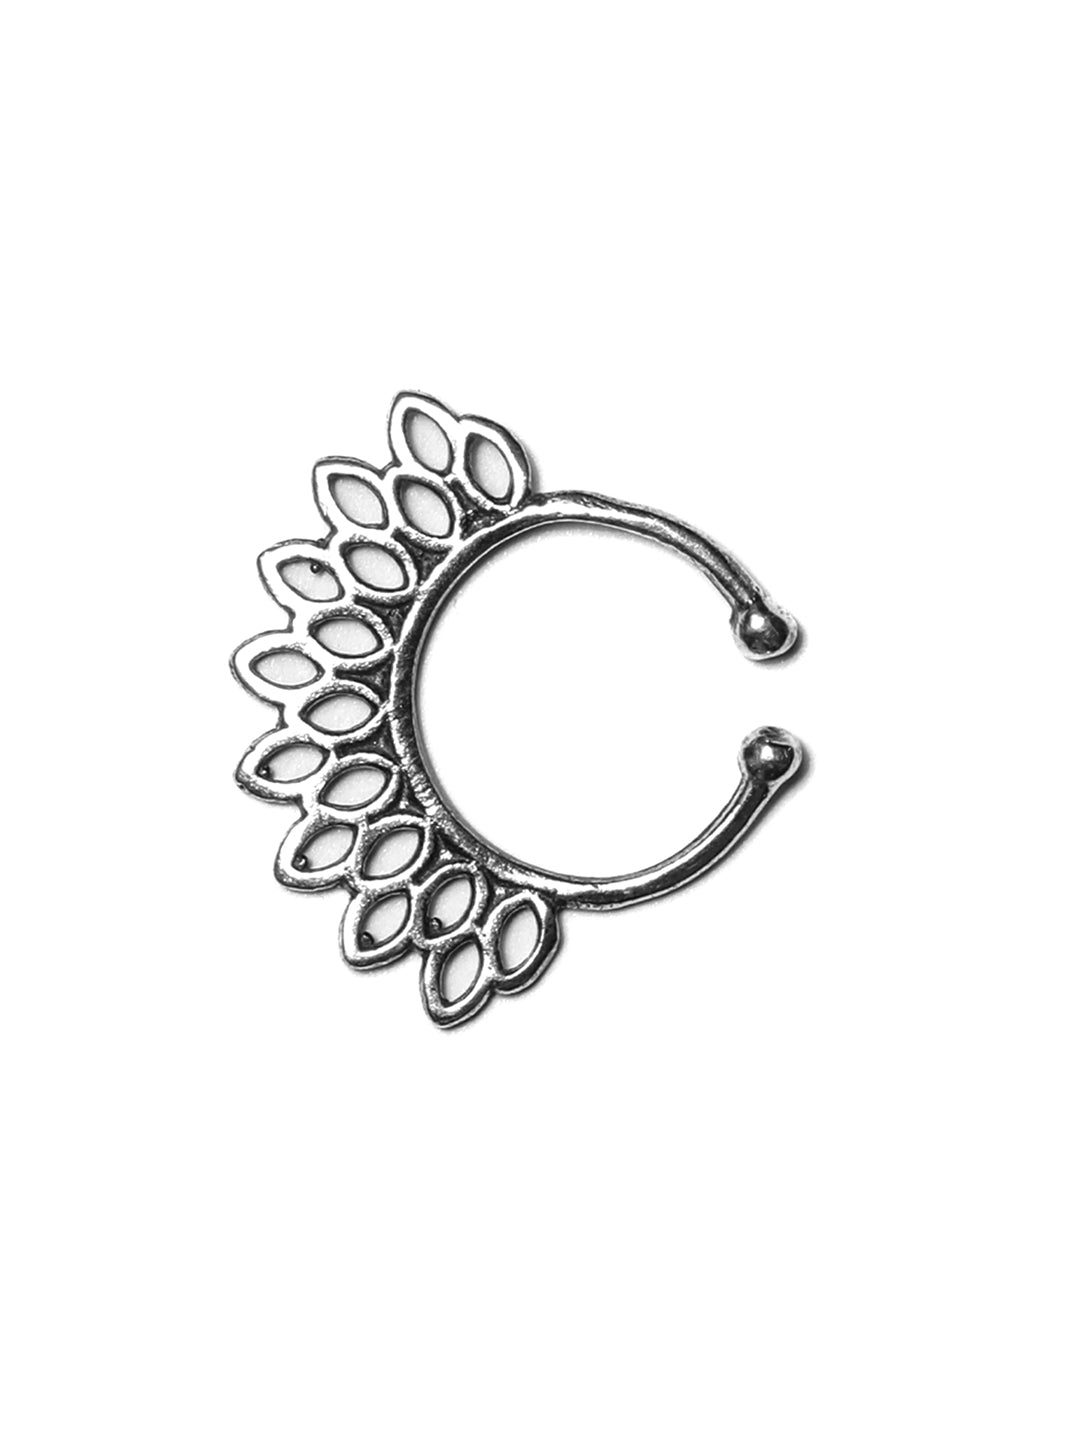 Oxidised Silver Tribal Septum Nose Ring